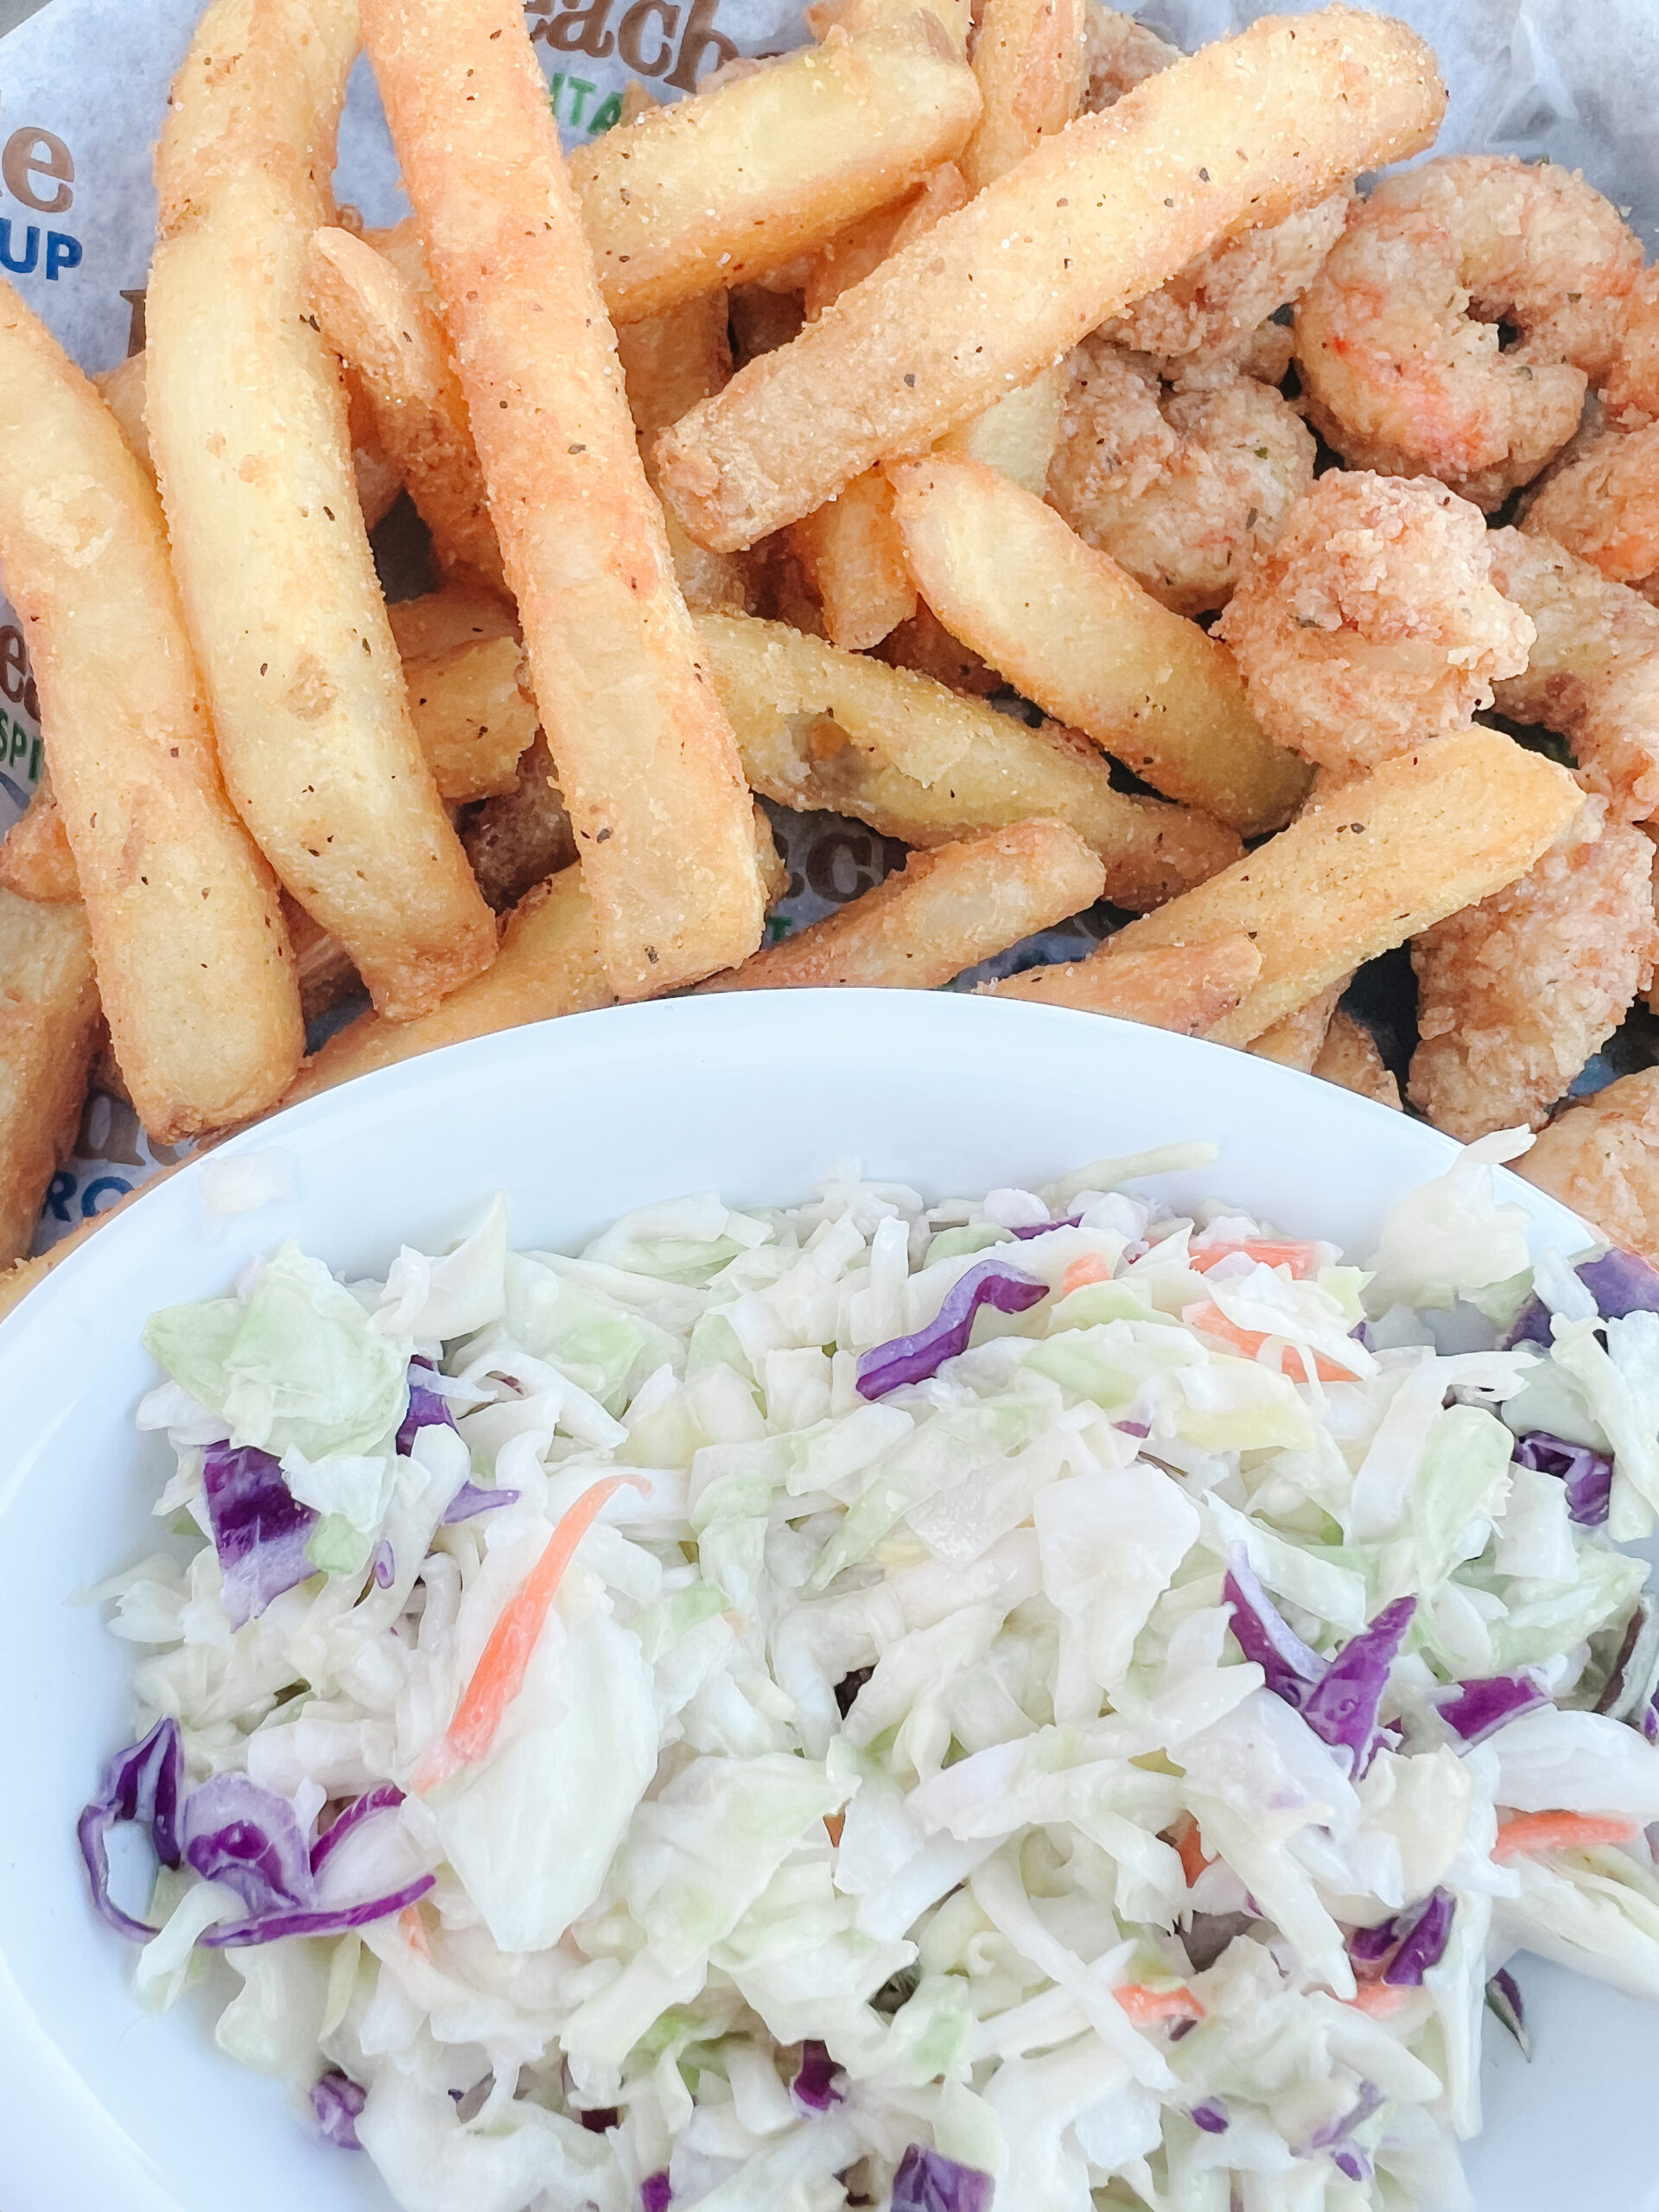 Fried shrimp, french fries, and cole slaw at Crabby's Beachside in Saint Augustine Florida